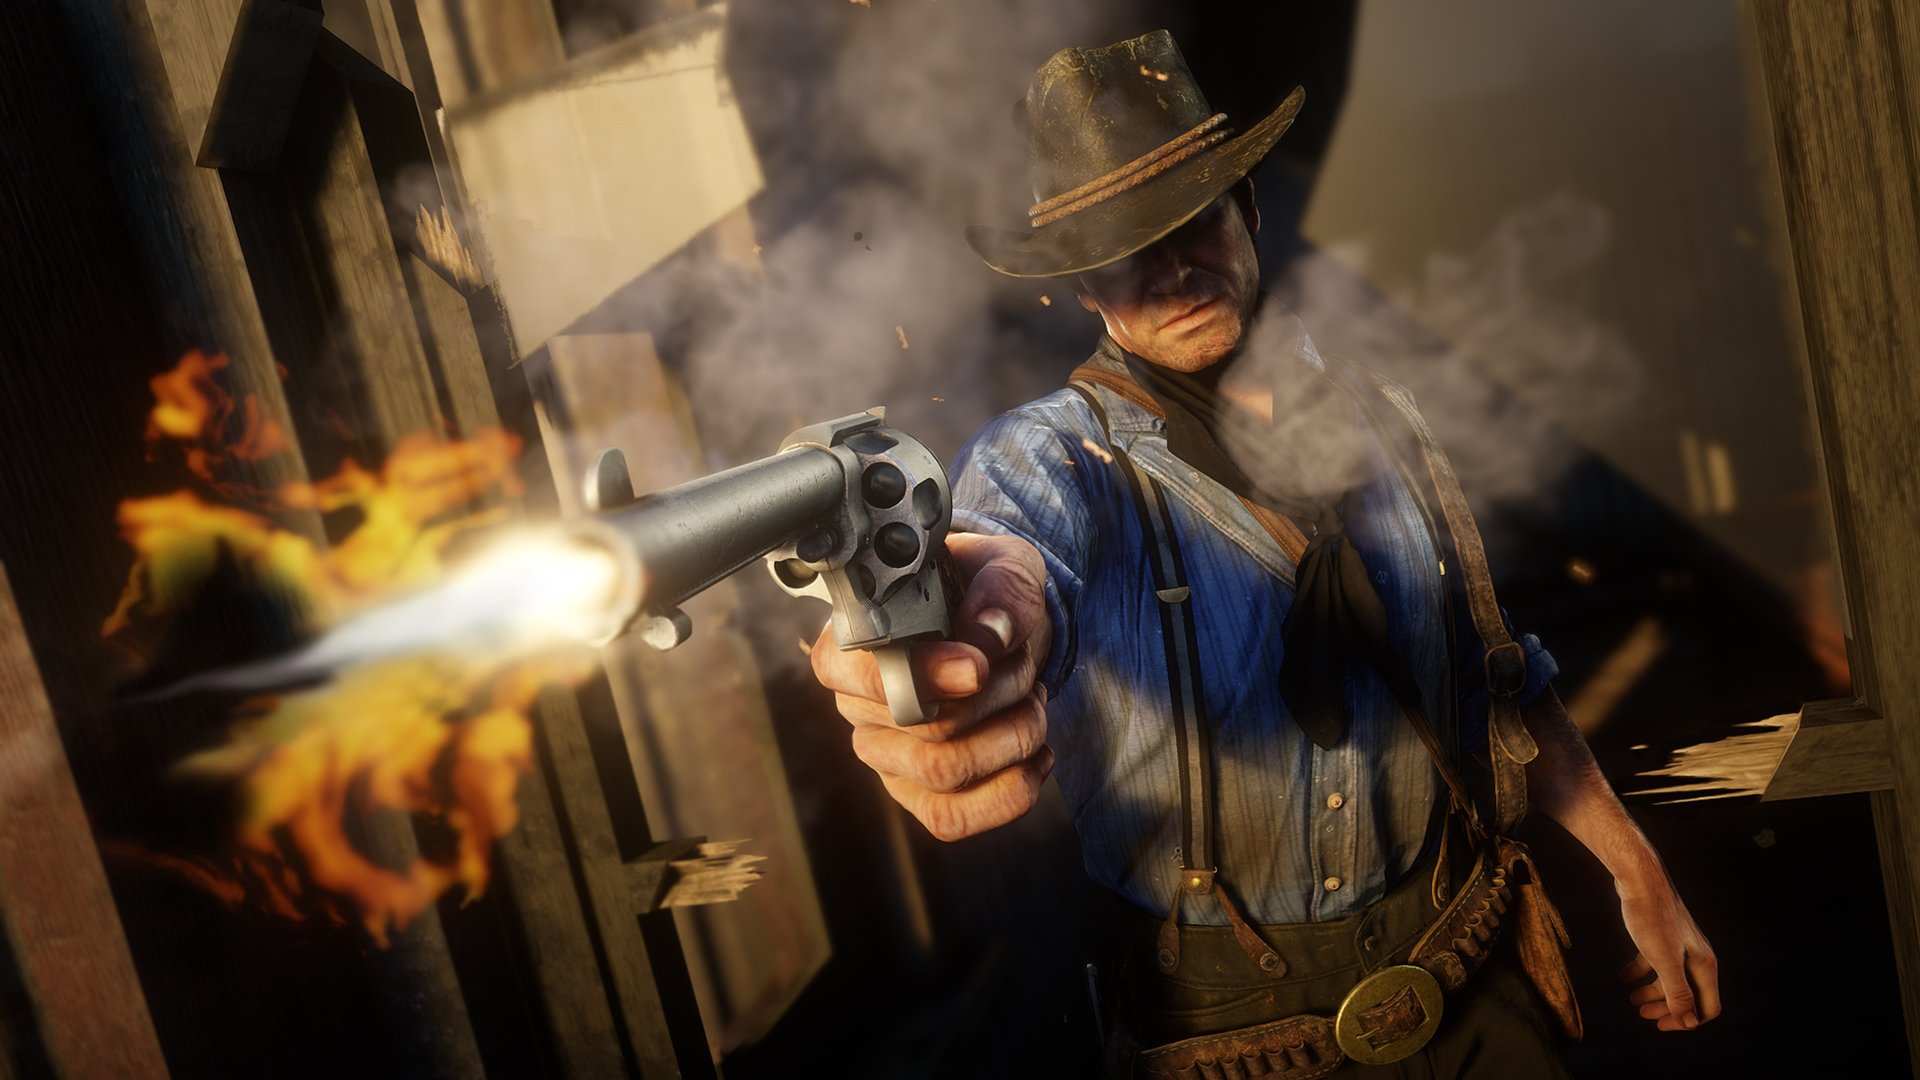 Red Dead Redemption 2 system requirements and PC features revealed